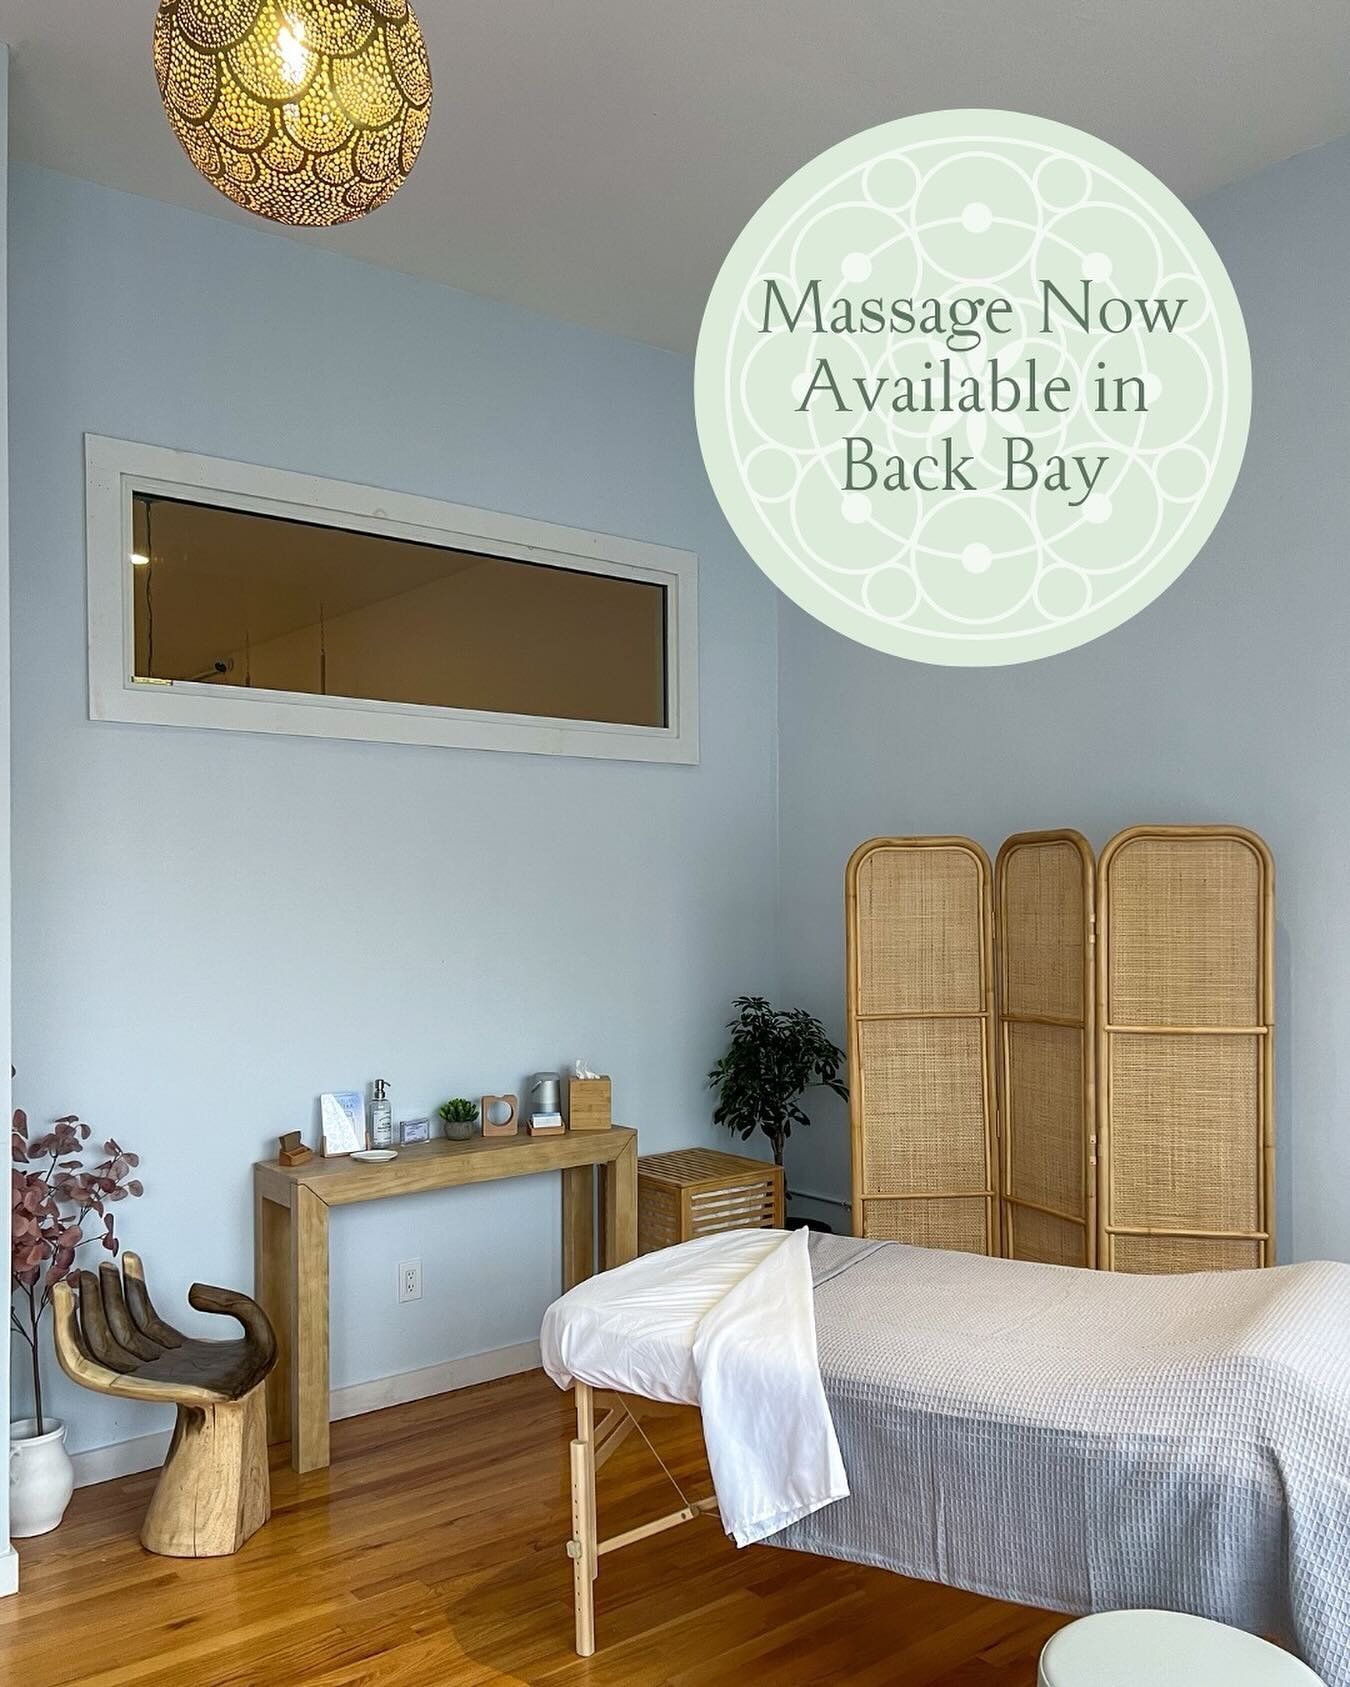 We&rsquo;re thrilled to announce the grand opening of our newest Unwind massage space at Back Bay! 🦢 Amidst the bustling energy of Back Bay, we present this serene oasis dedicated to fostering tranquility &amp; balance. 

Appointments are available 